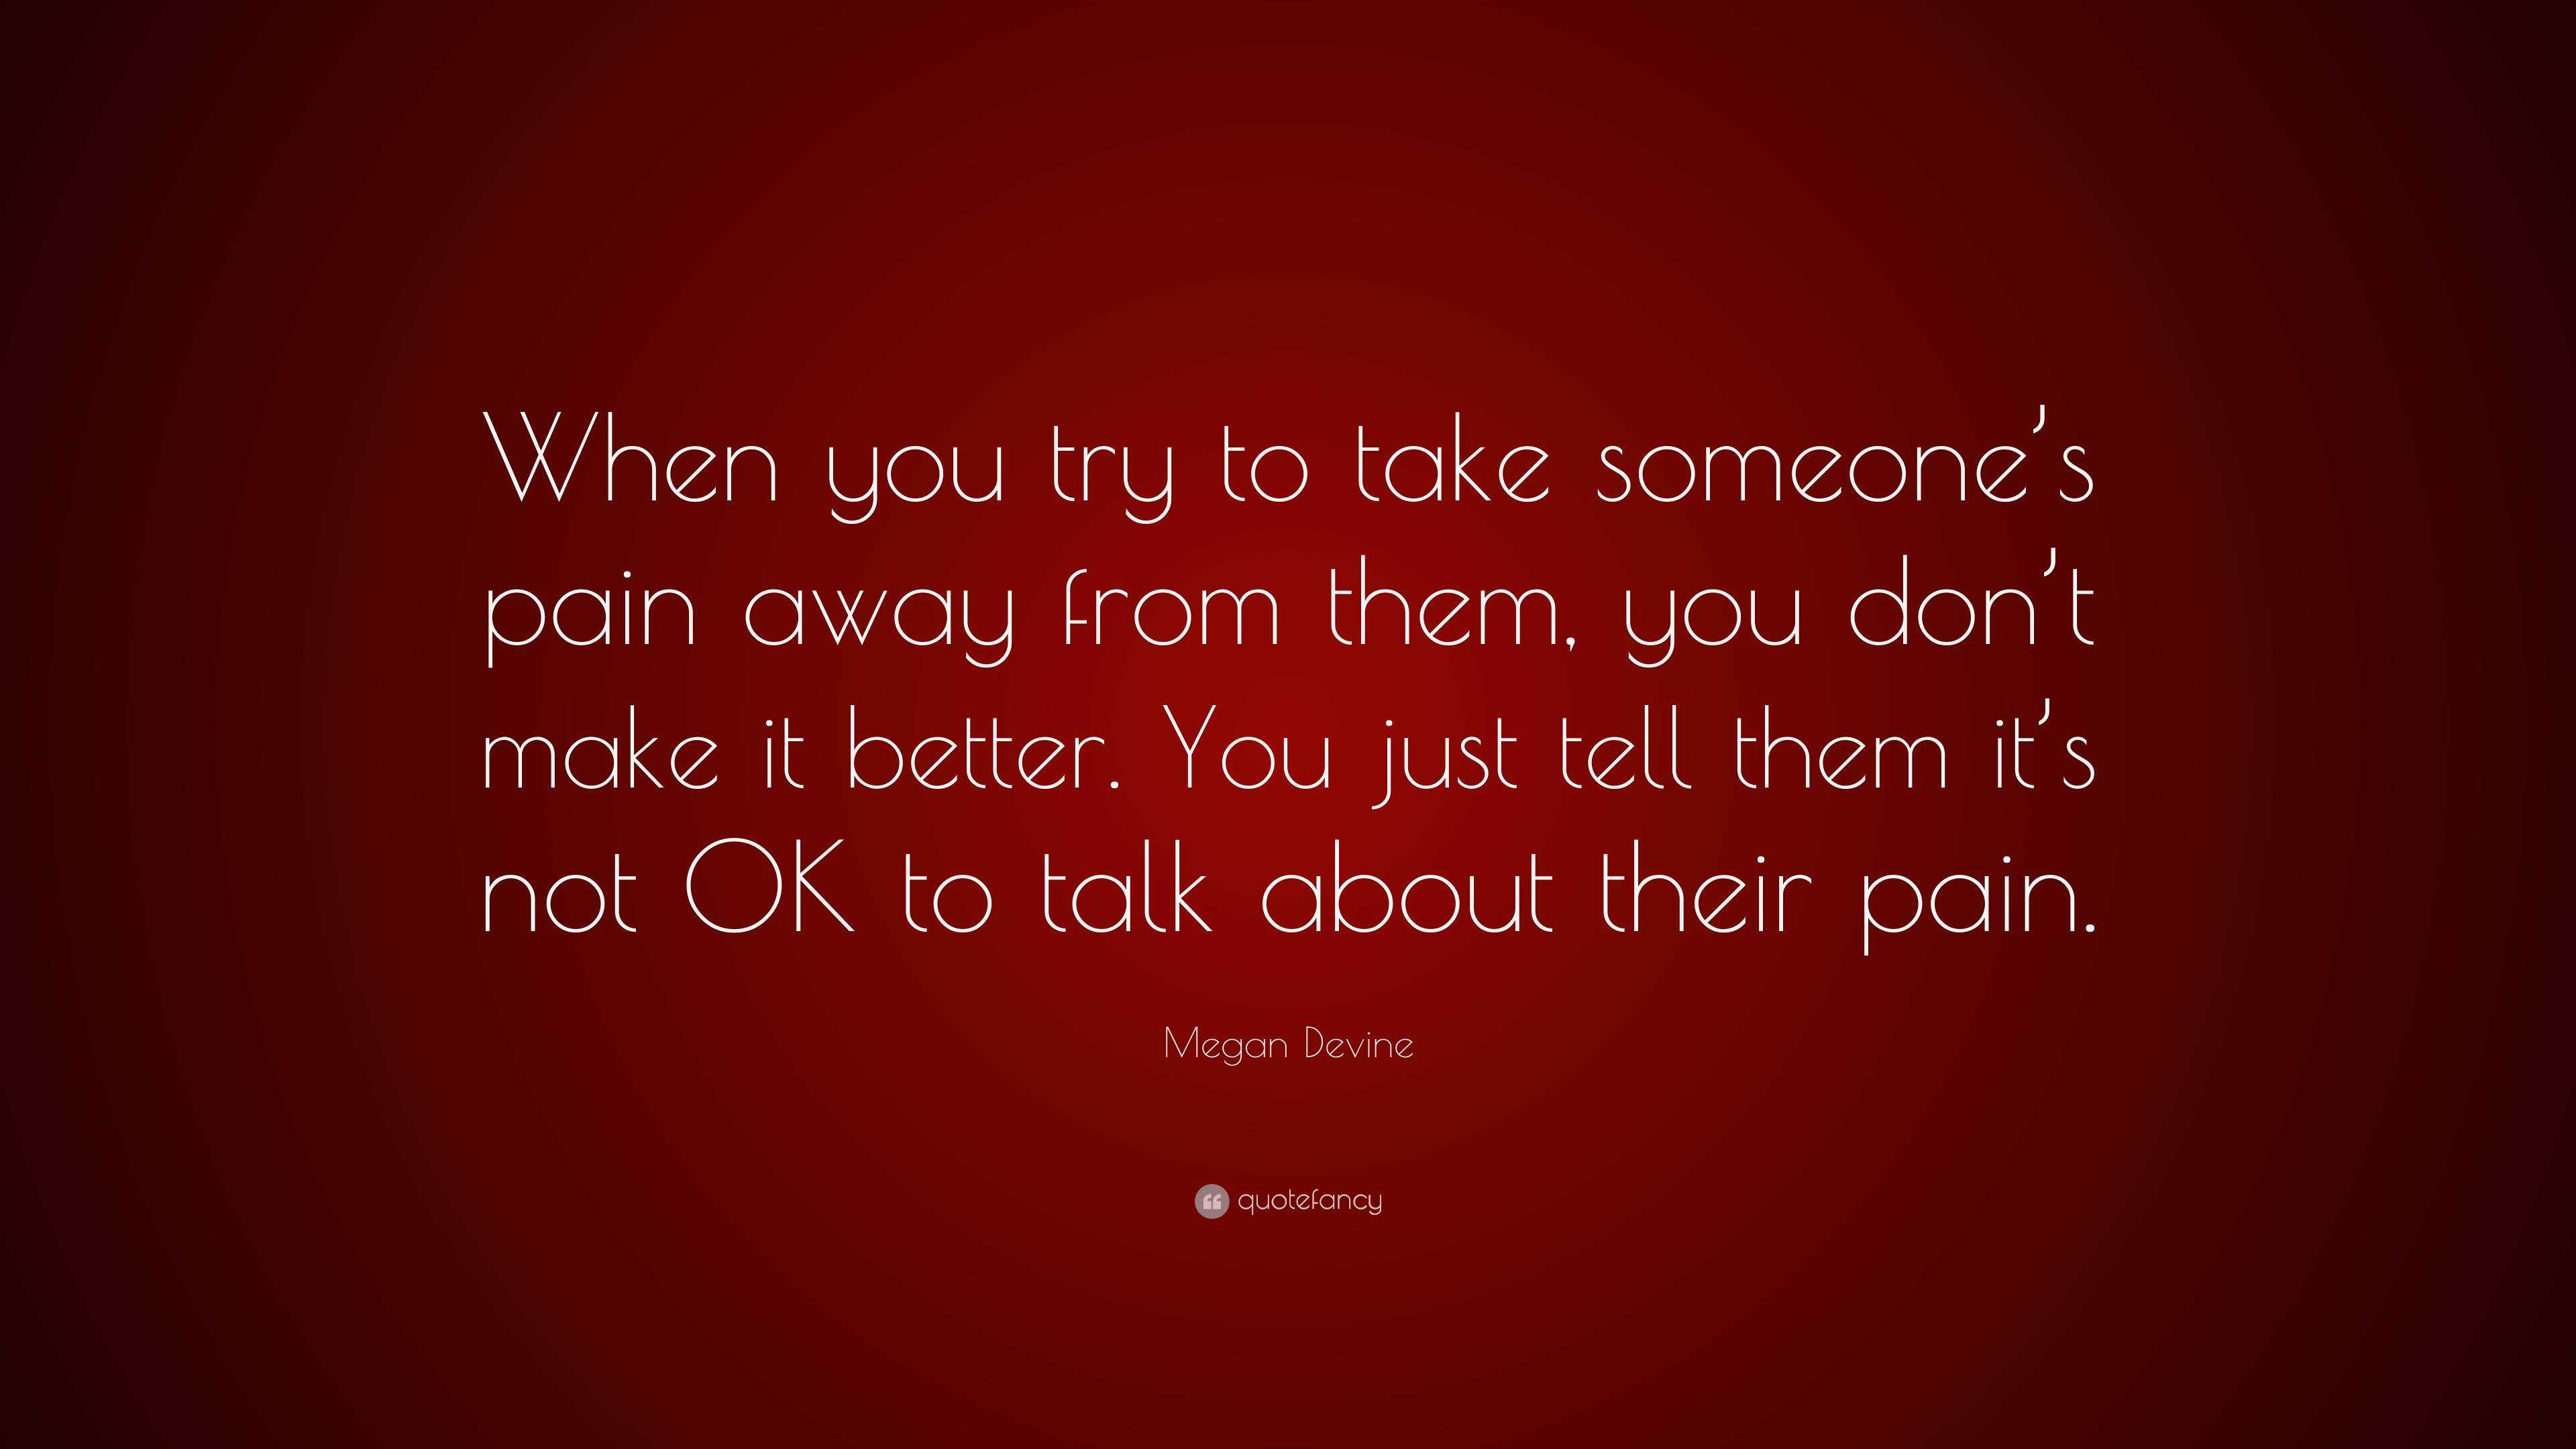 Megan Devine Quote “when You Try To Take Someone’s Pain Away From Them You Don’t Make It